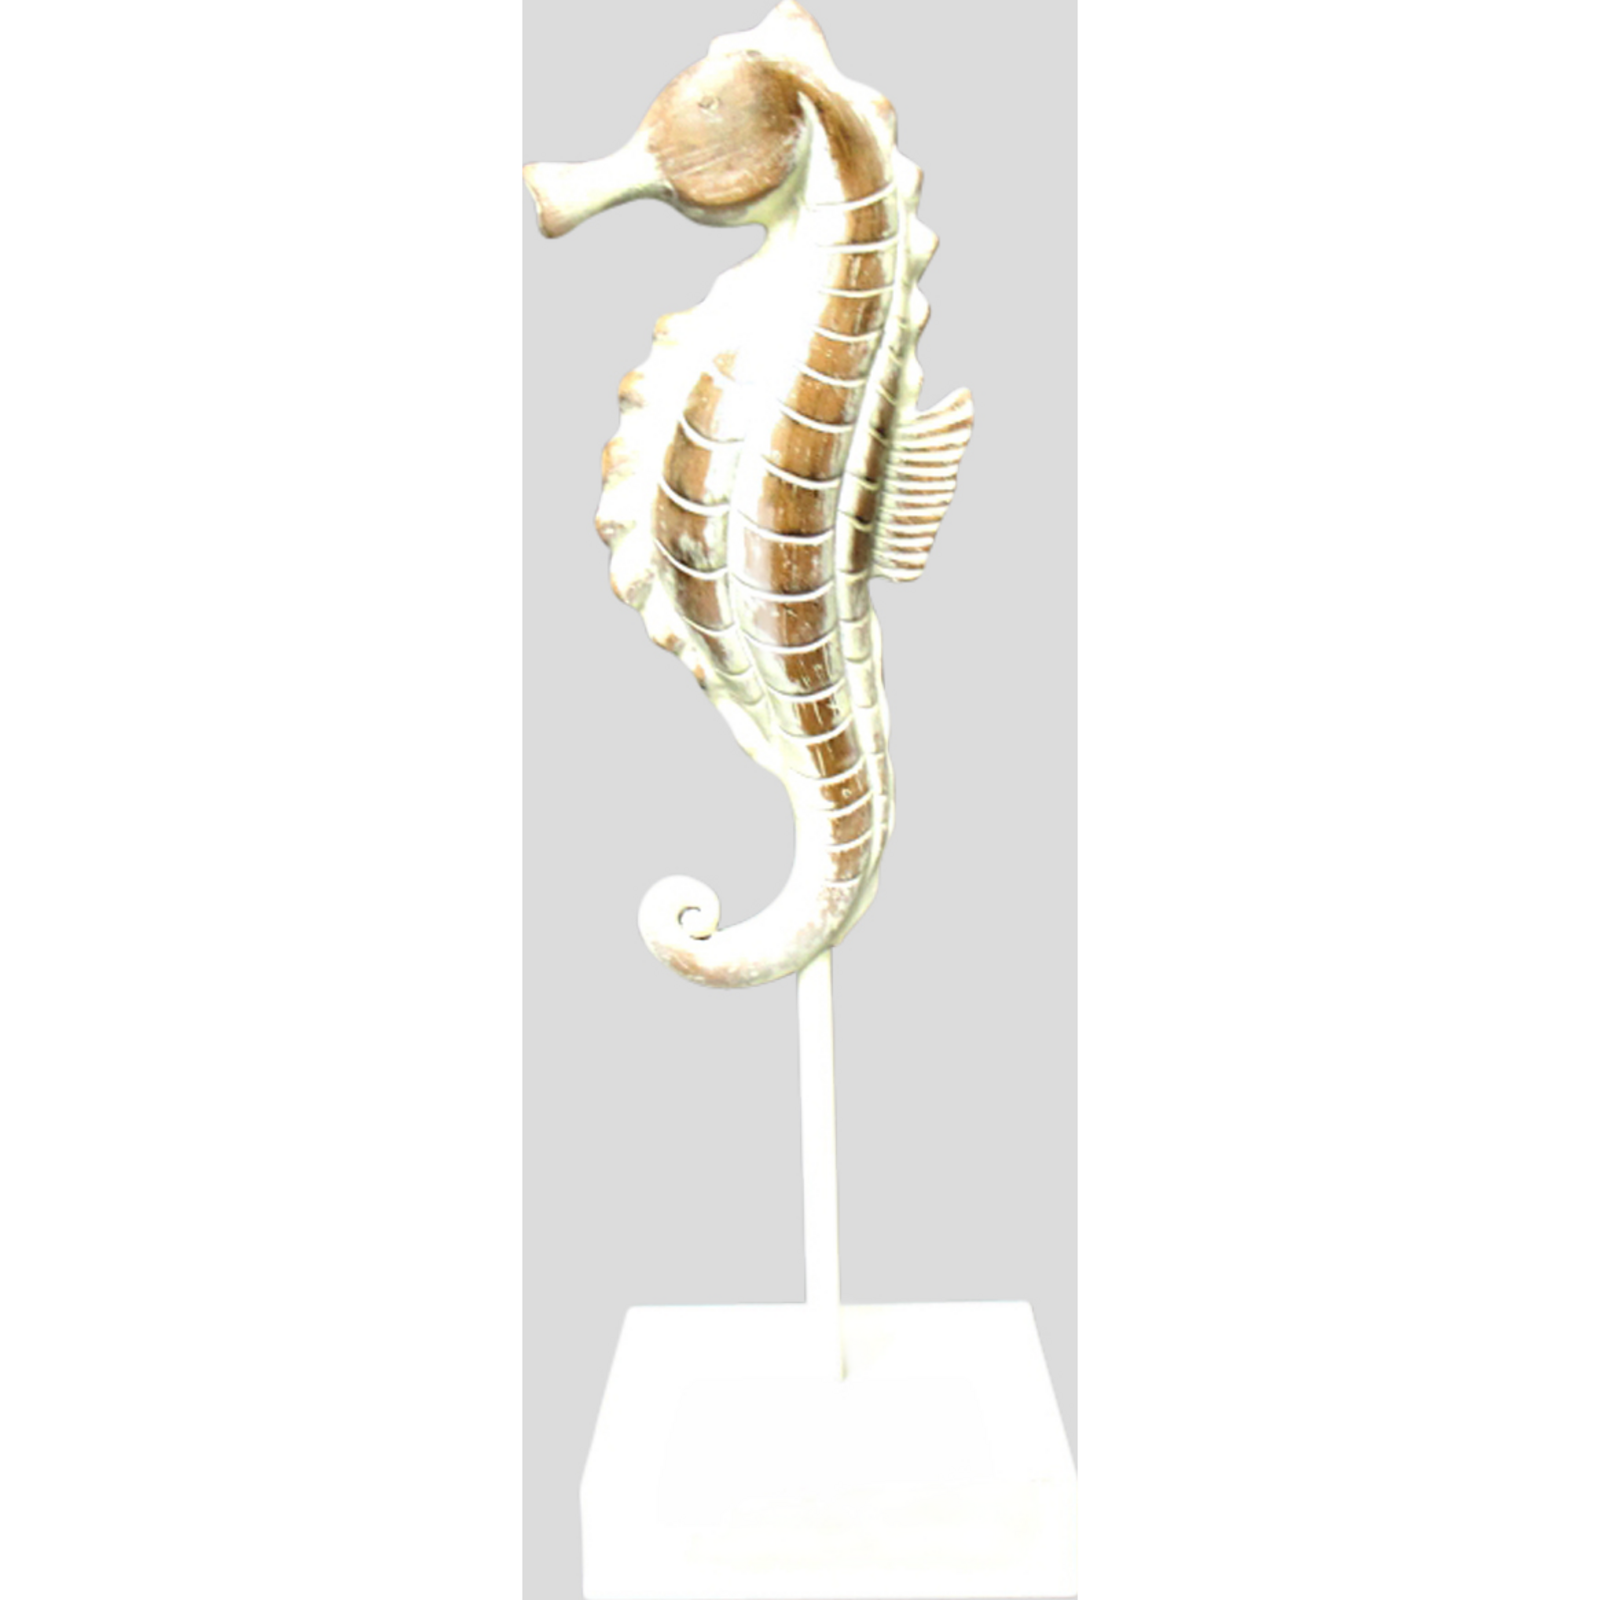 Seahorse on Stand